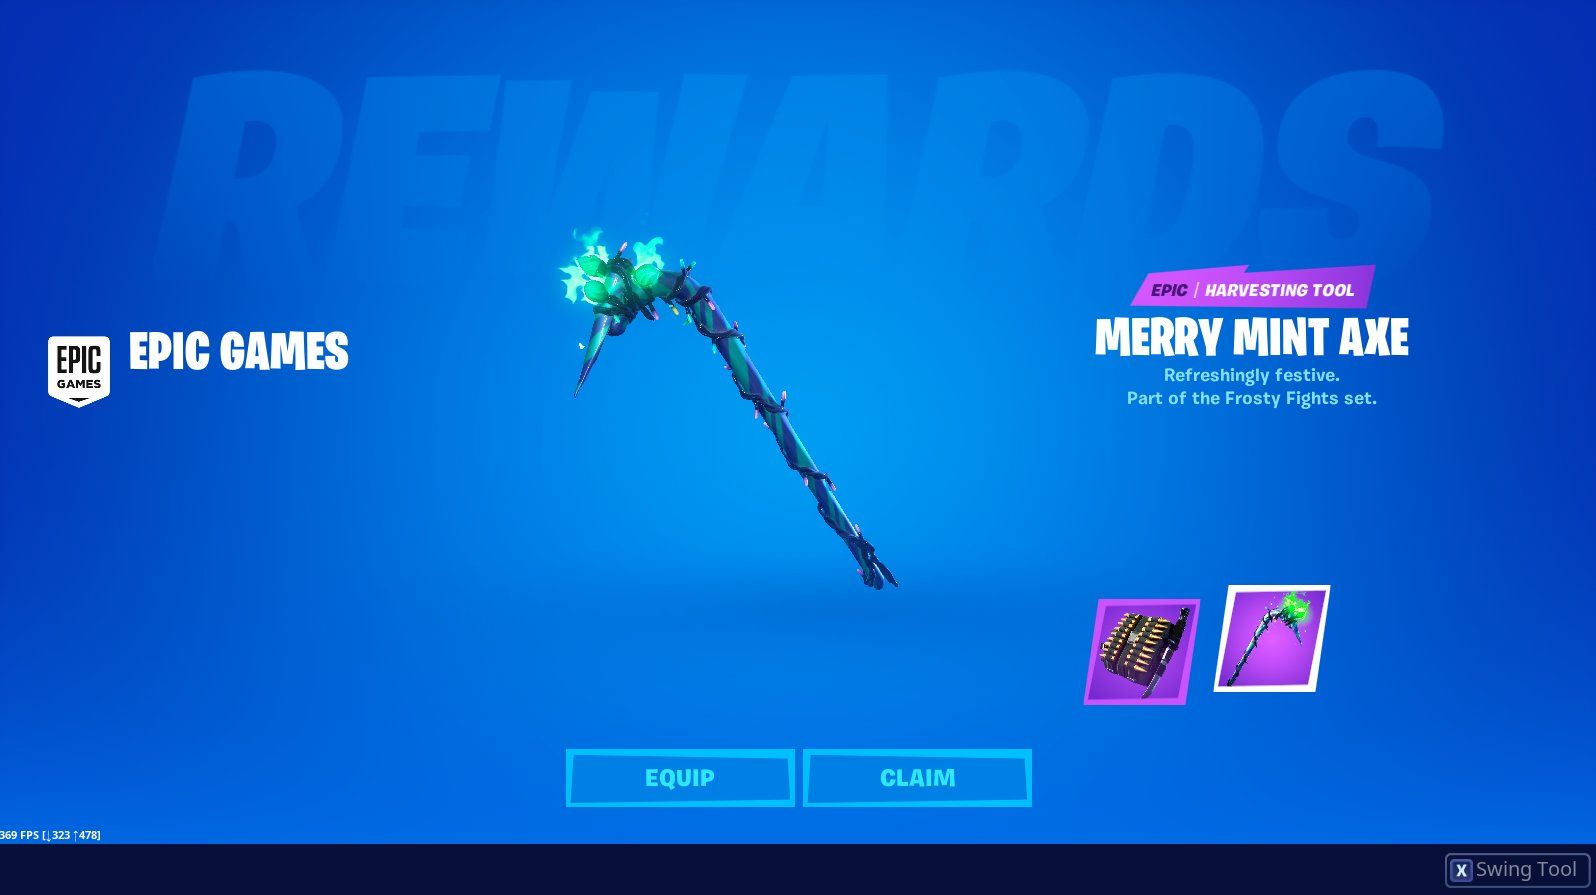 Free Fortnite Merry Mint Axe Pickaxe being granted Heres how to get your code The Merry Mint Ax. Free gift card generator, Gift card generator, Funny text memes